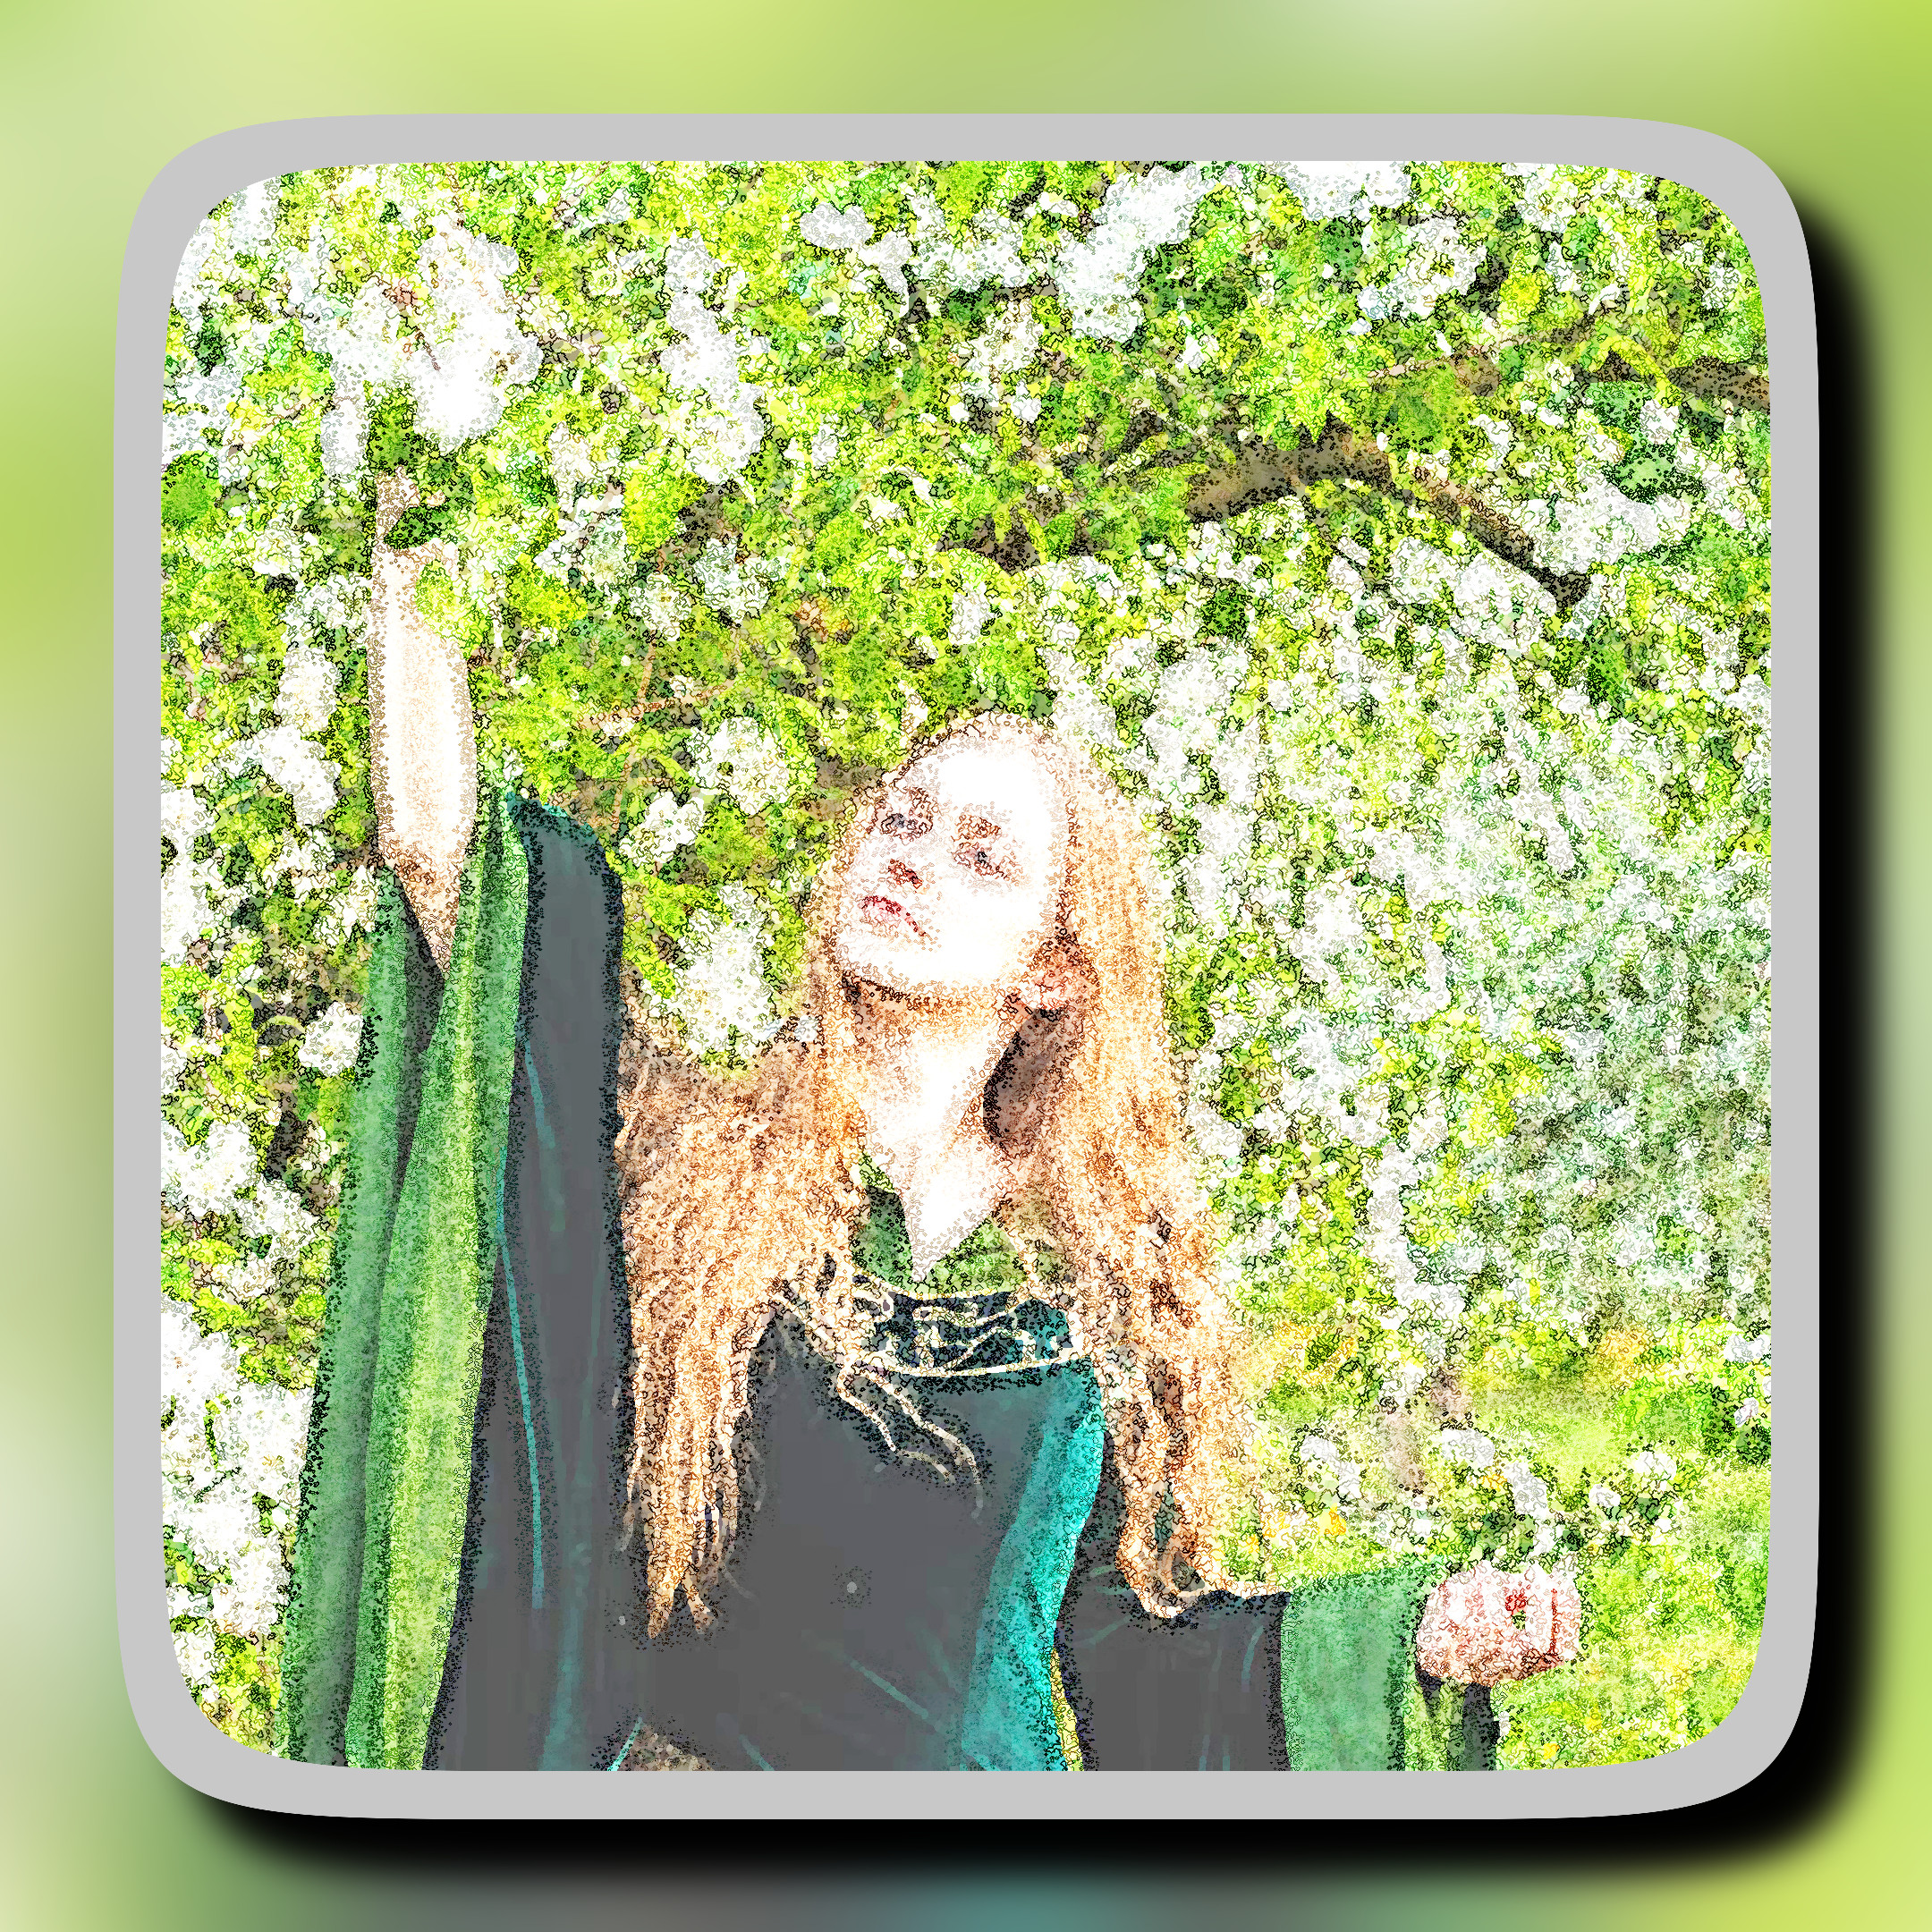 2023-08-15 15-53-15eowyn_by_aquilina108_db8boxu-fullview_portrait with a framed artistic effect, styleMakeSquiggly.jpeg